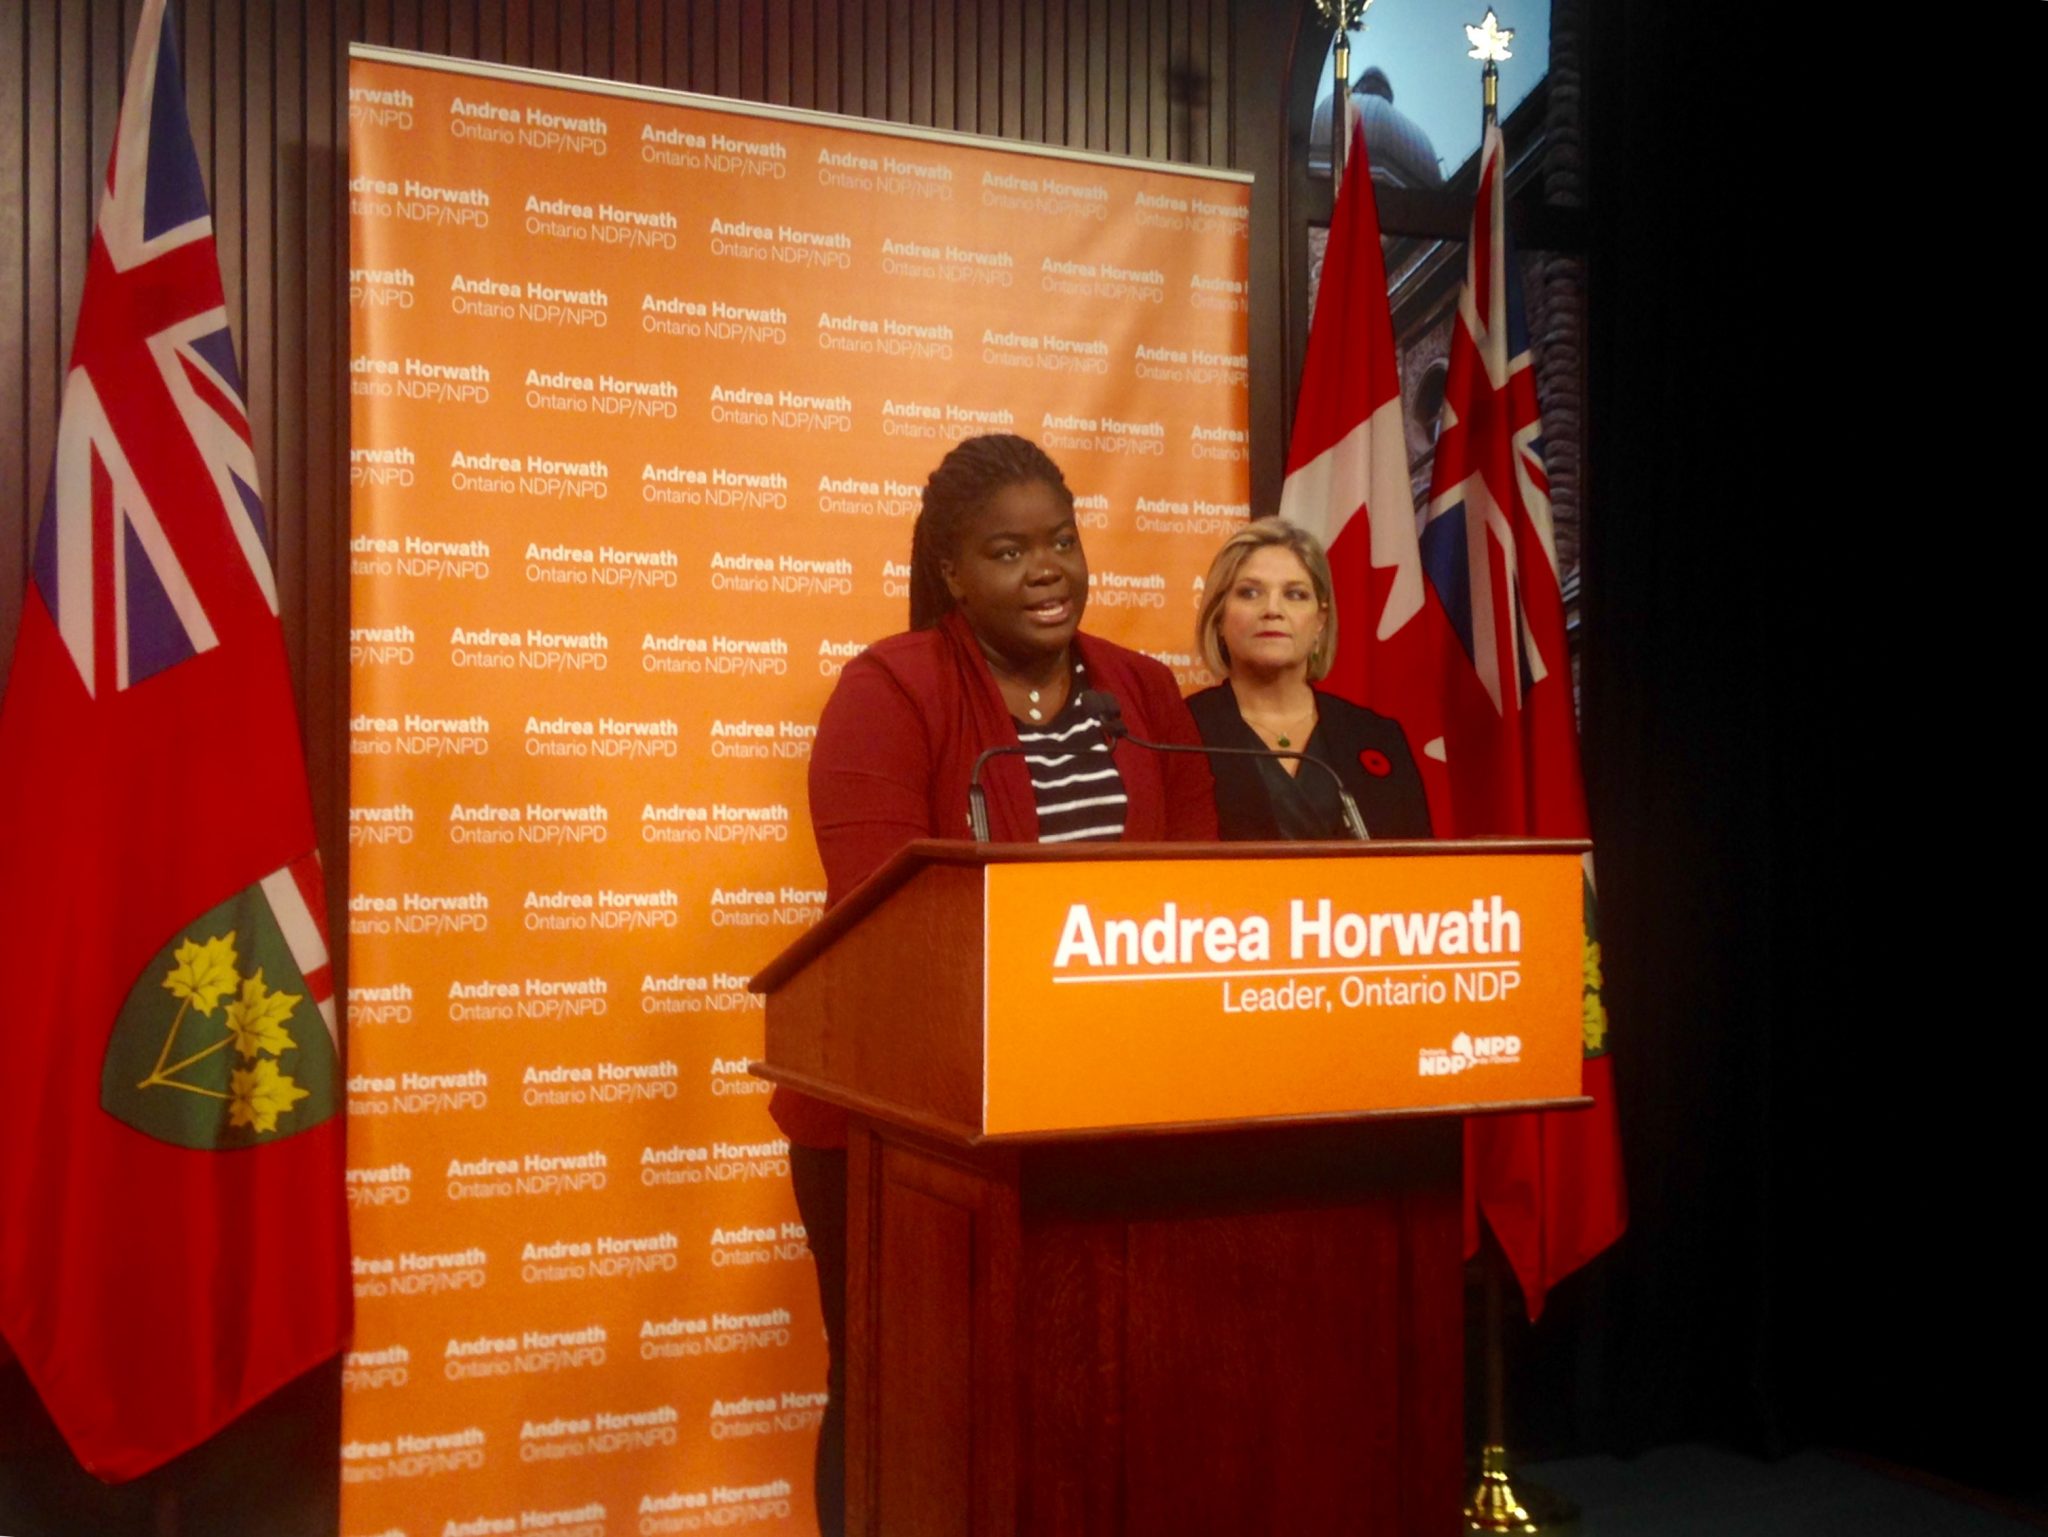 Horwath presses for more paid leave, vacation and protections for workers